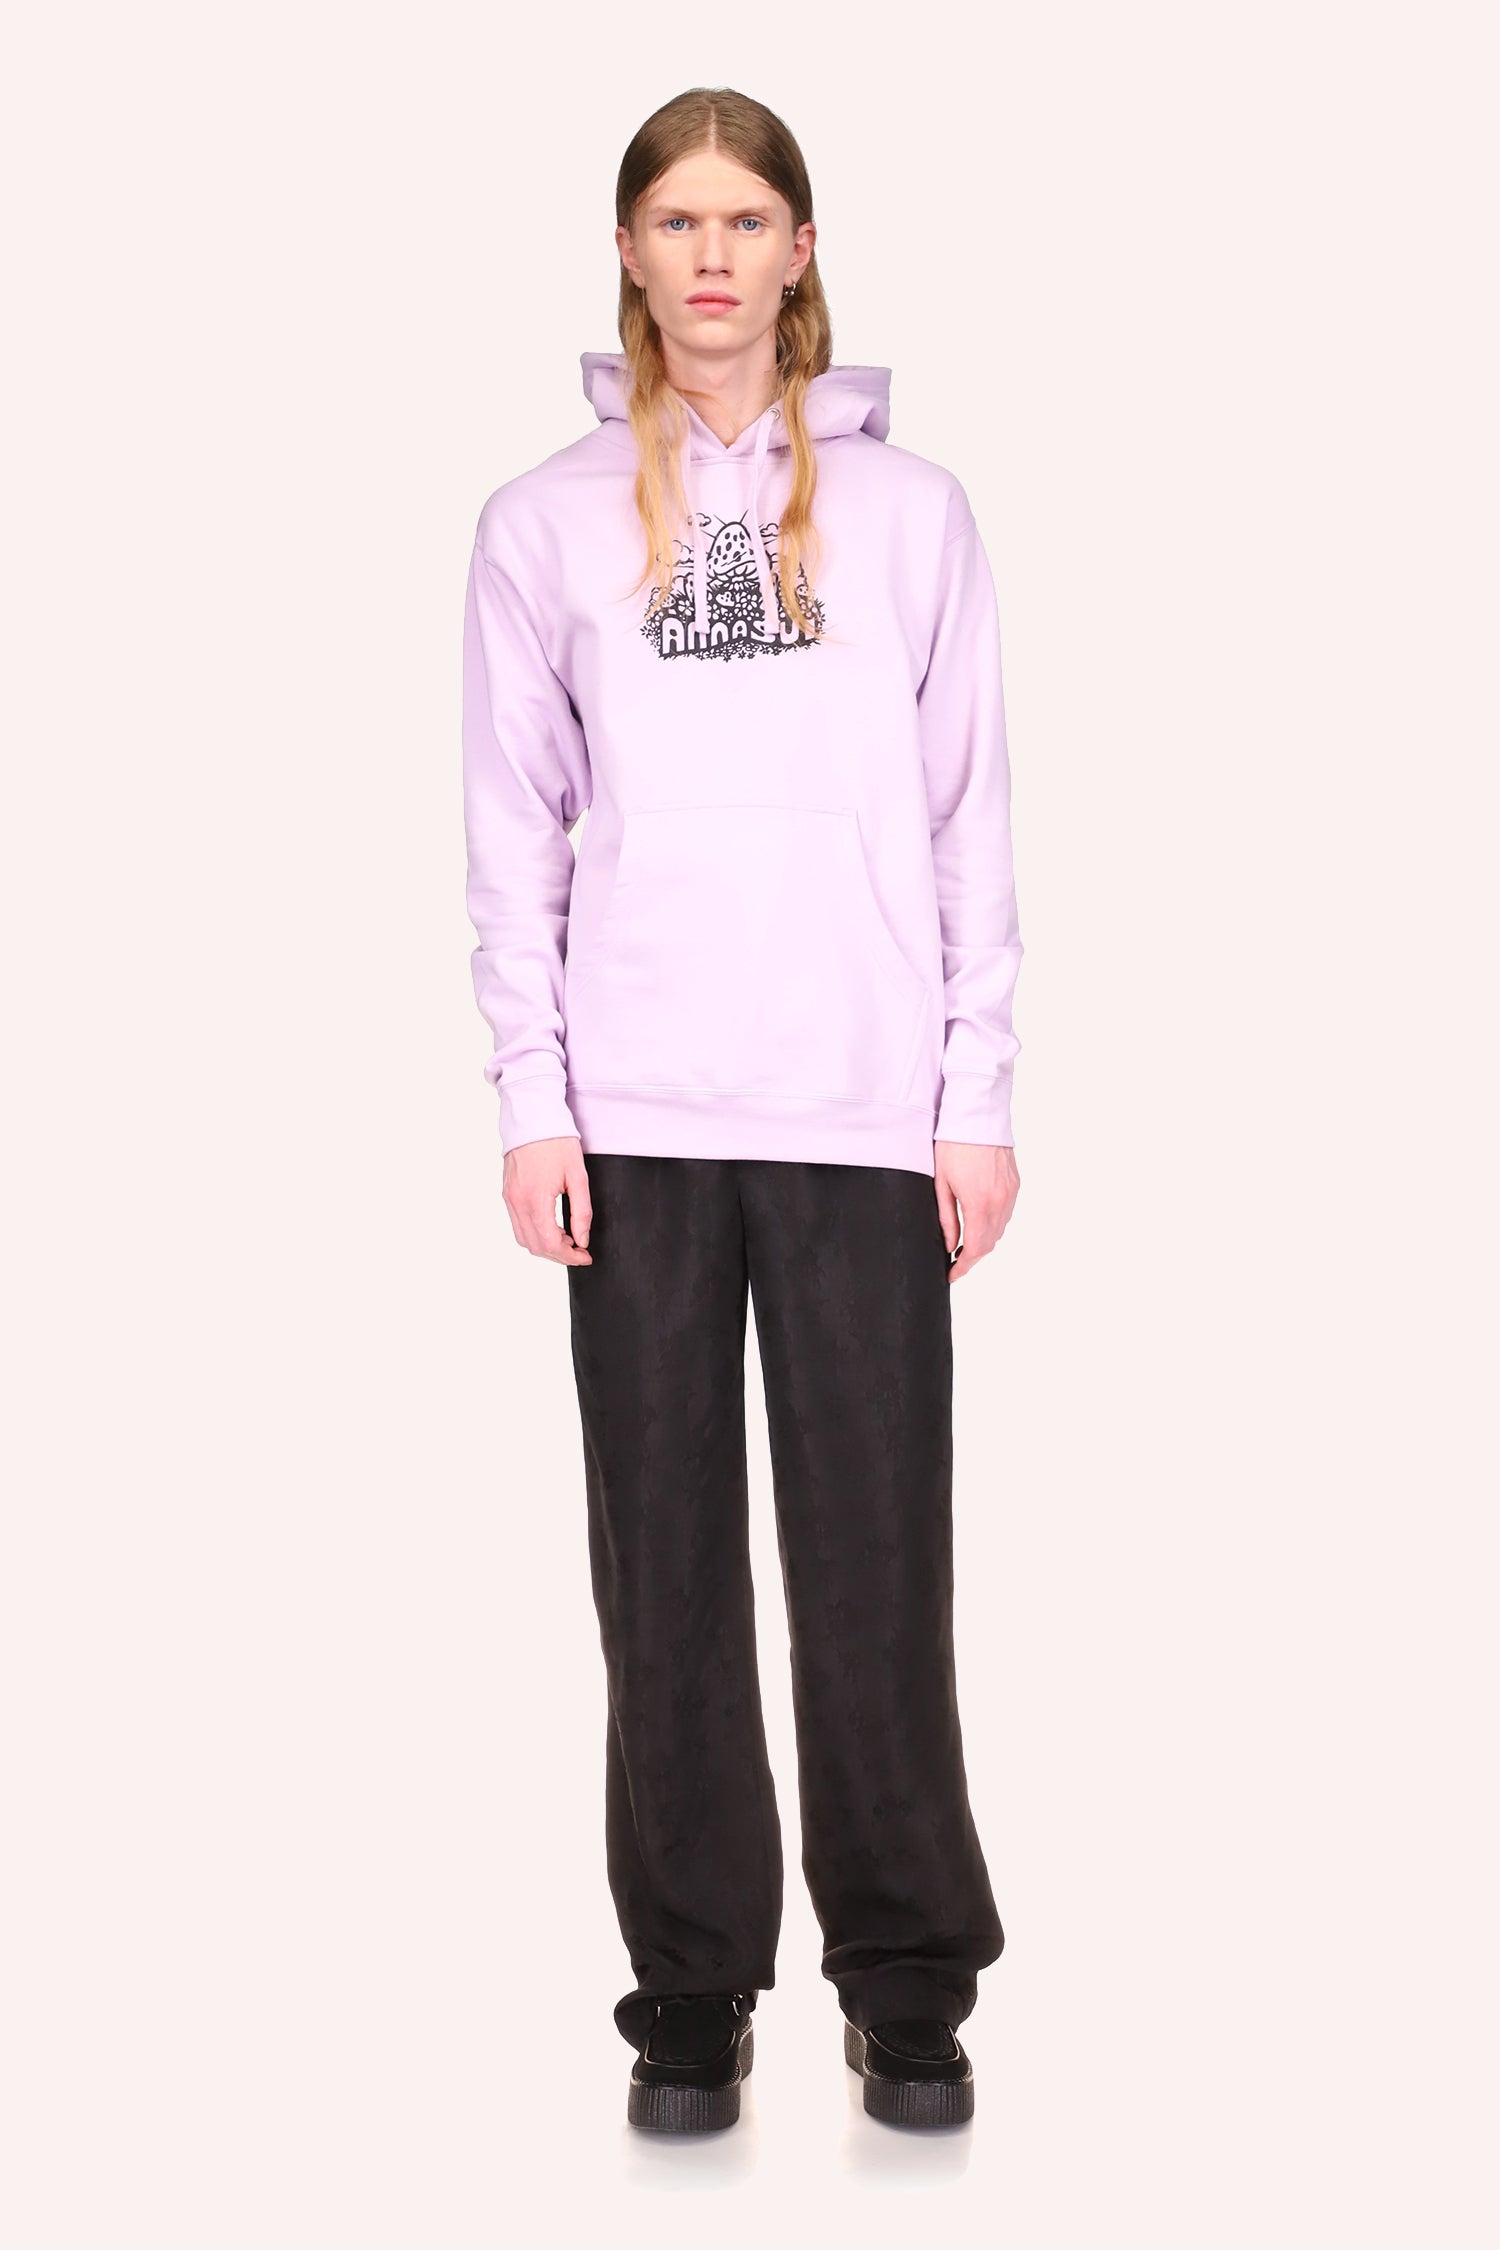 Mushroom Hoodie Lavender long sleeves hoodie sweatshirt, with an Anna Sui label in front, 2 front pockets